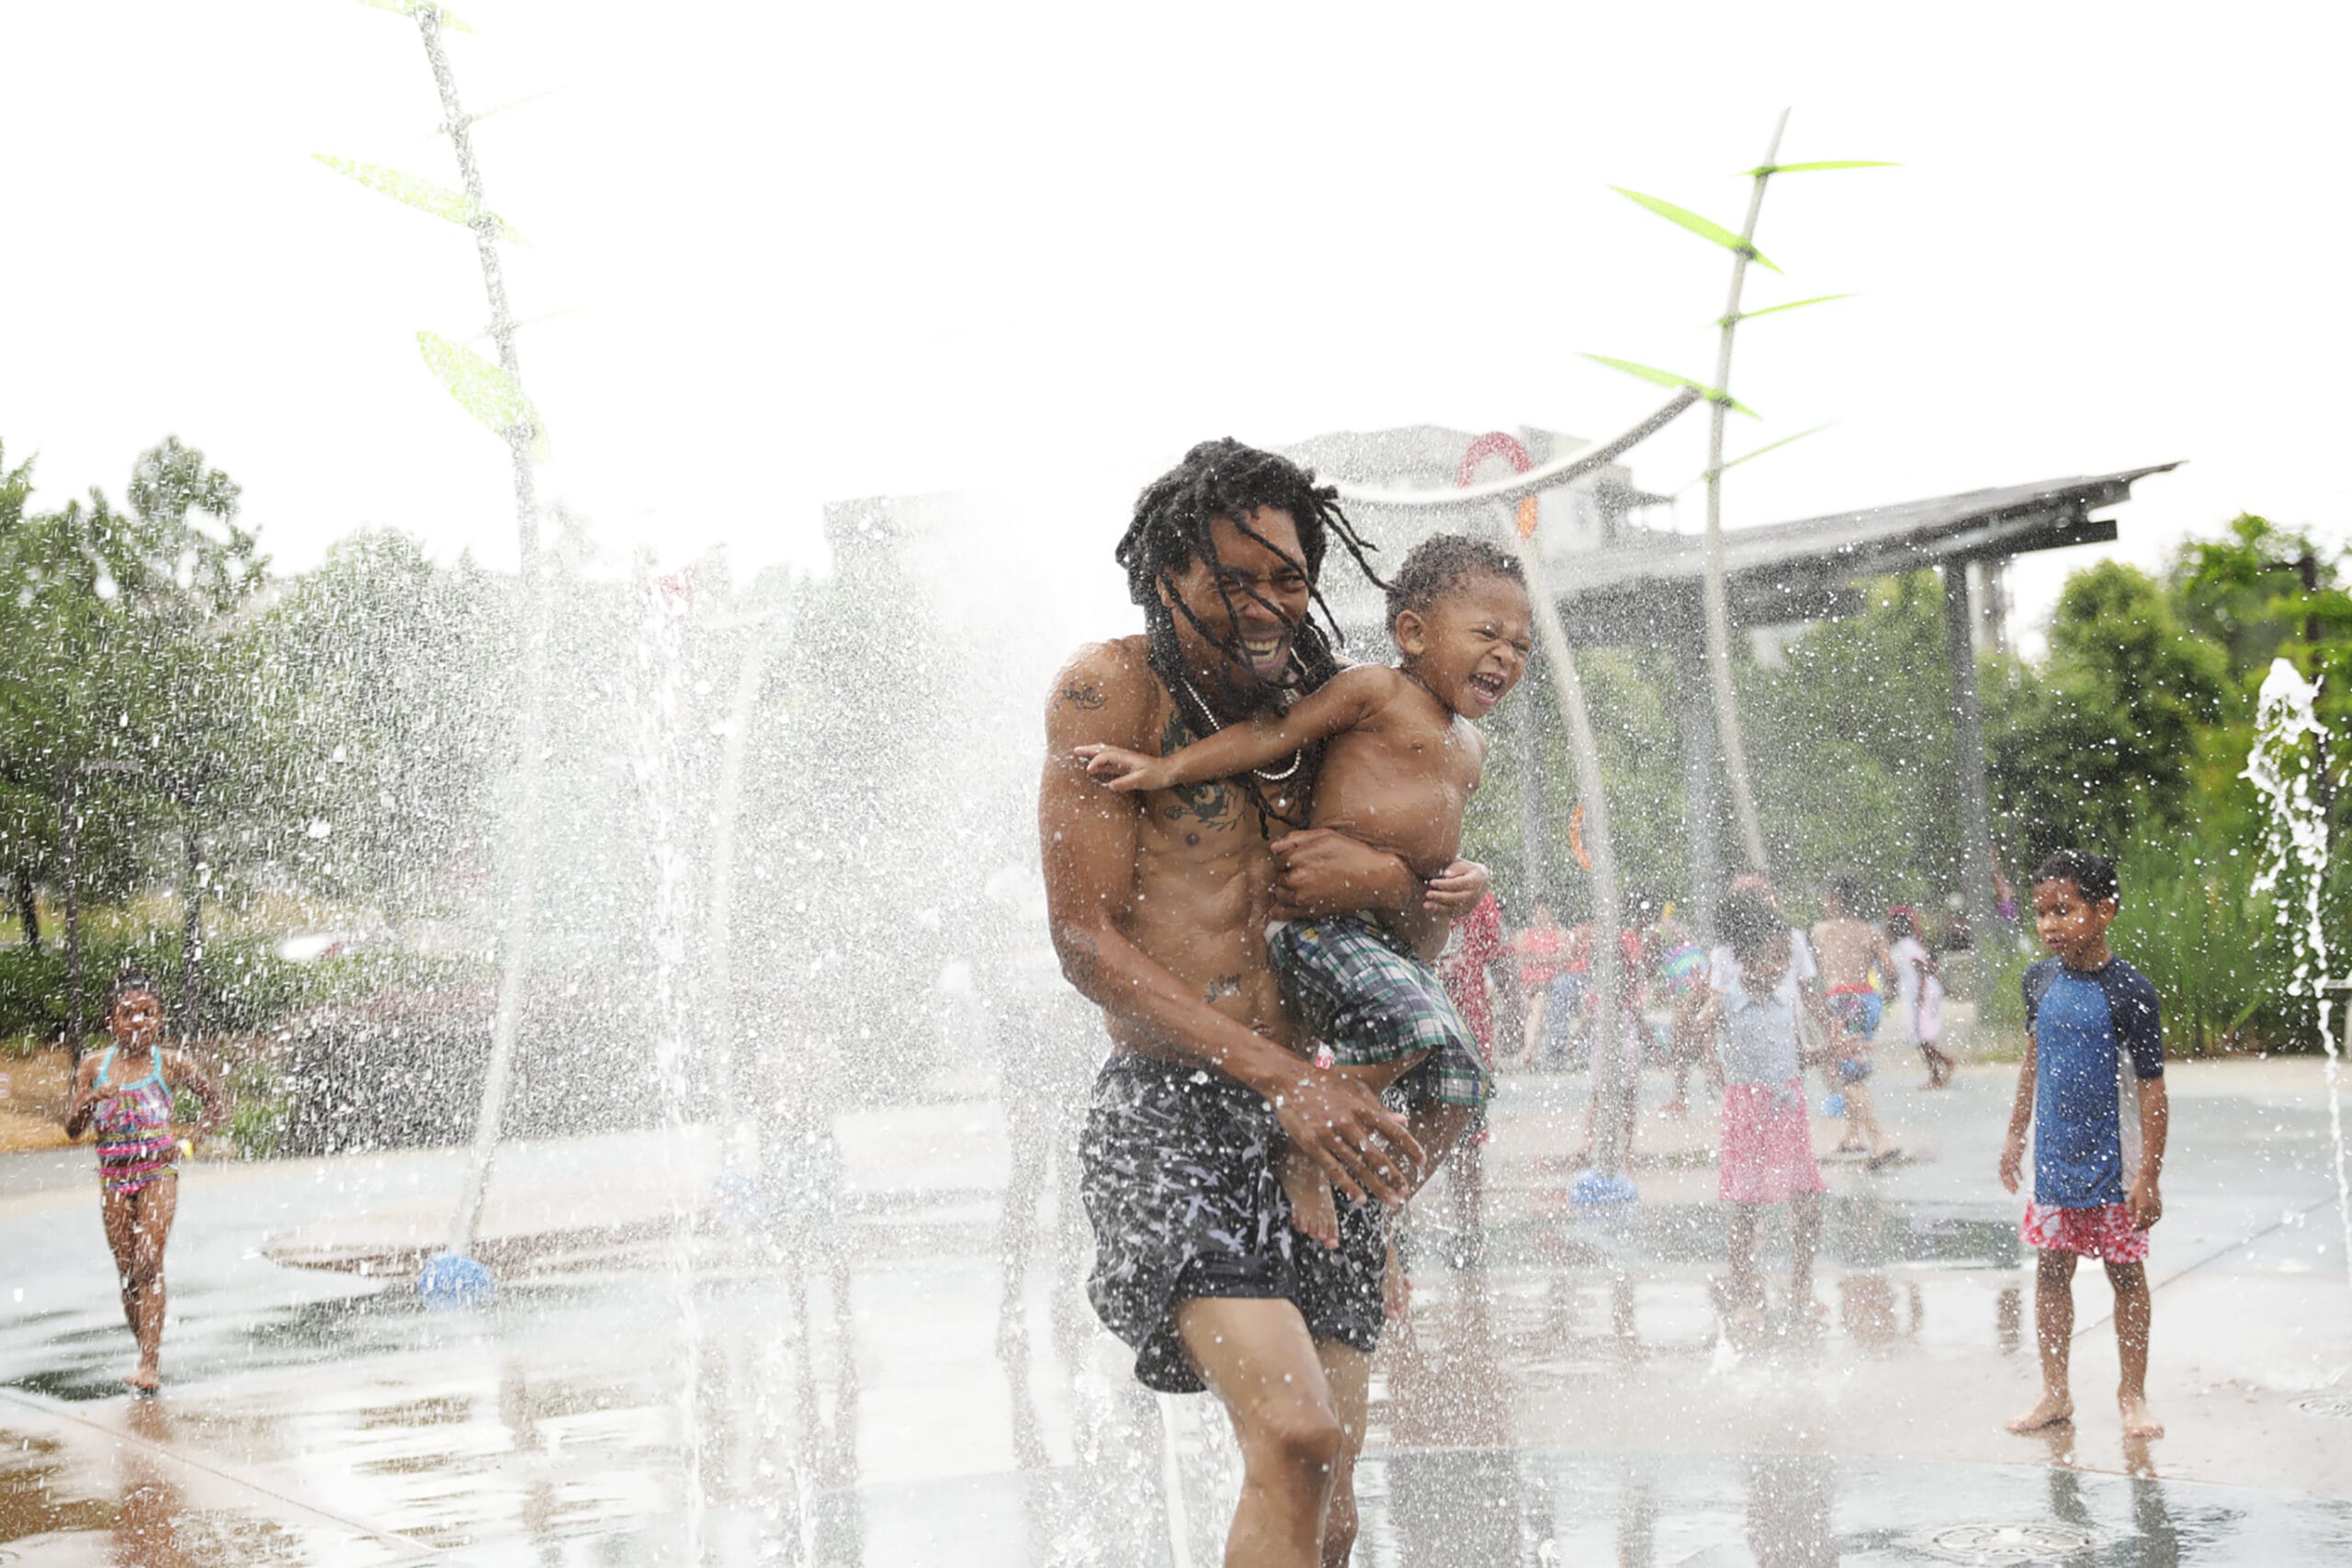 A man and a child playing in a water fountain.